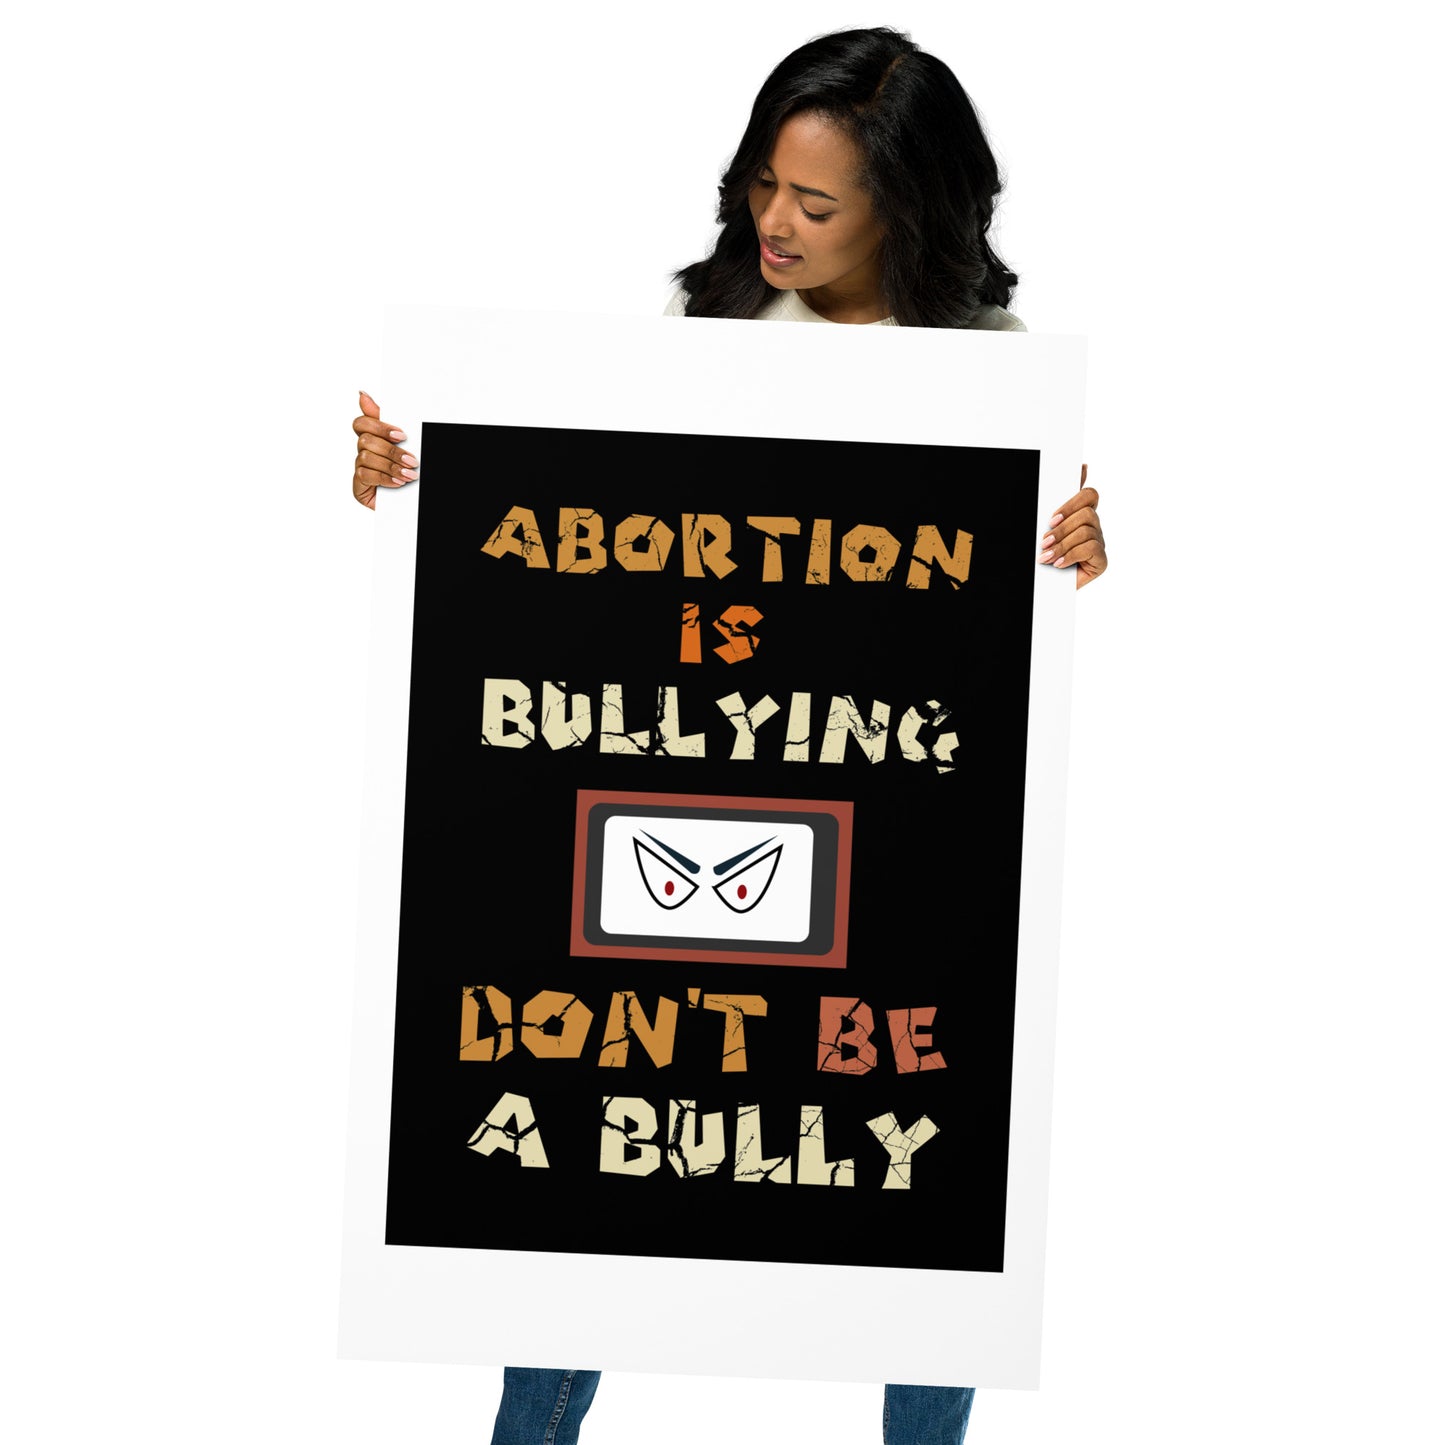 A001 Art Print - Museum Quality Giclée Print Featuring Sinister Eyes Graphic with text “Abortion is Bullying. Don’t be a Bully.”